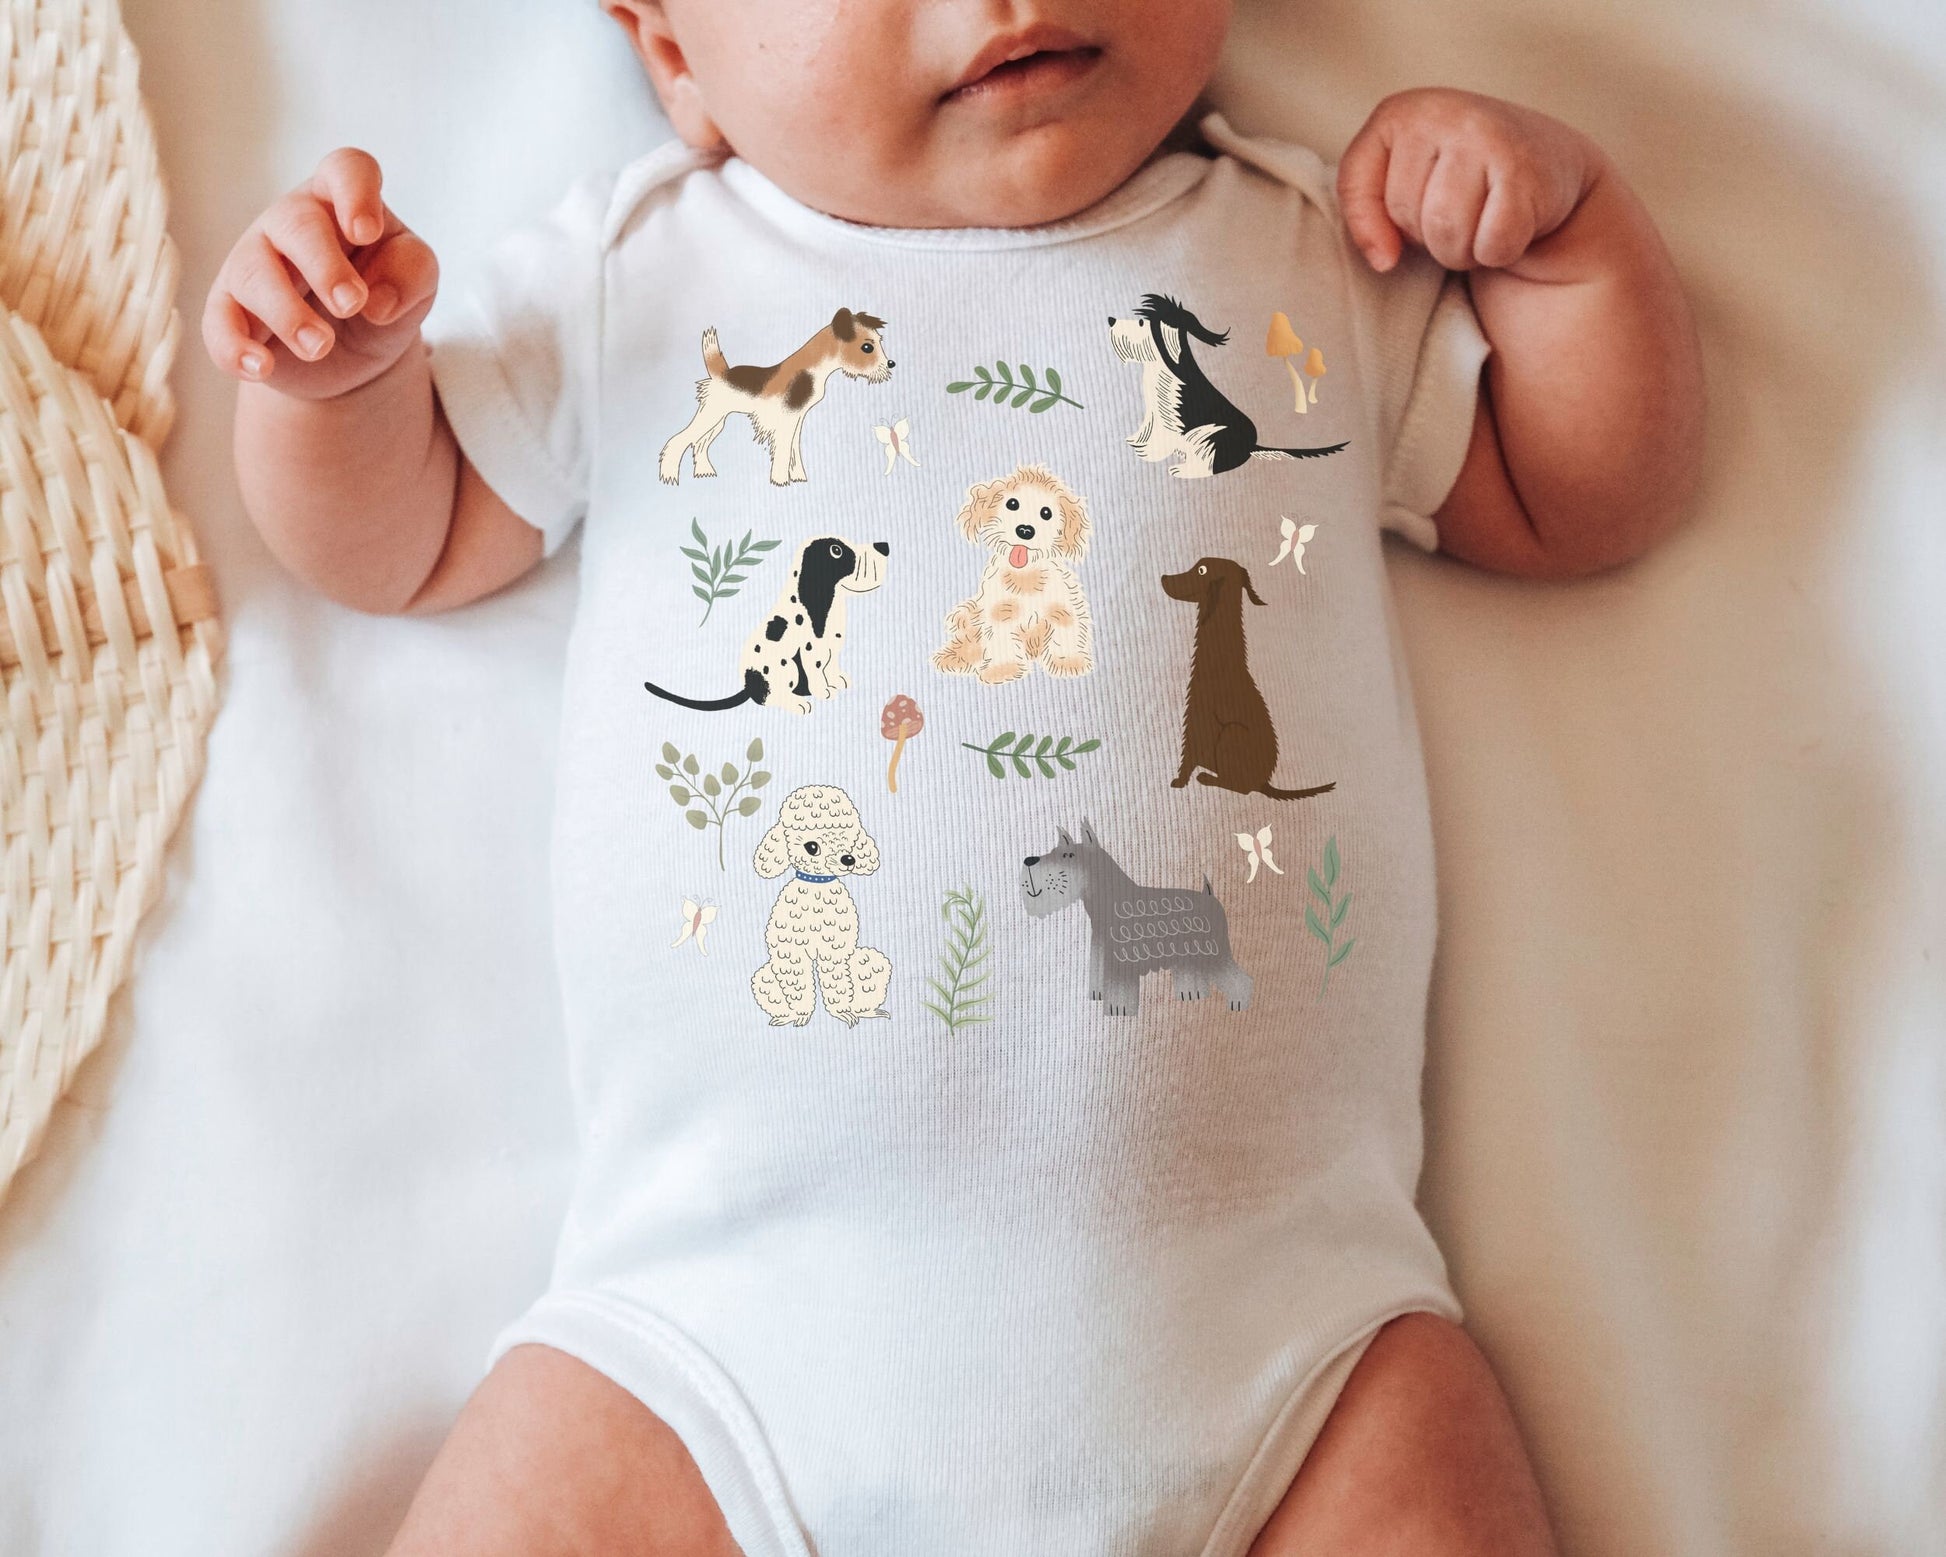 Dog Baby Bodysuit Cottage Core Baby Clothes Mushroom Baby Dog Lover Gift Puppy Shirt for Baby Infant Bodysuit Dog Lover Animal Lover Gift